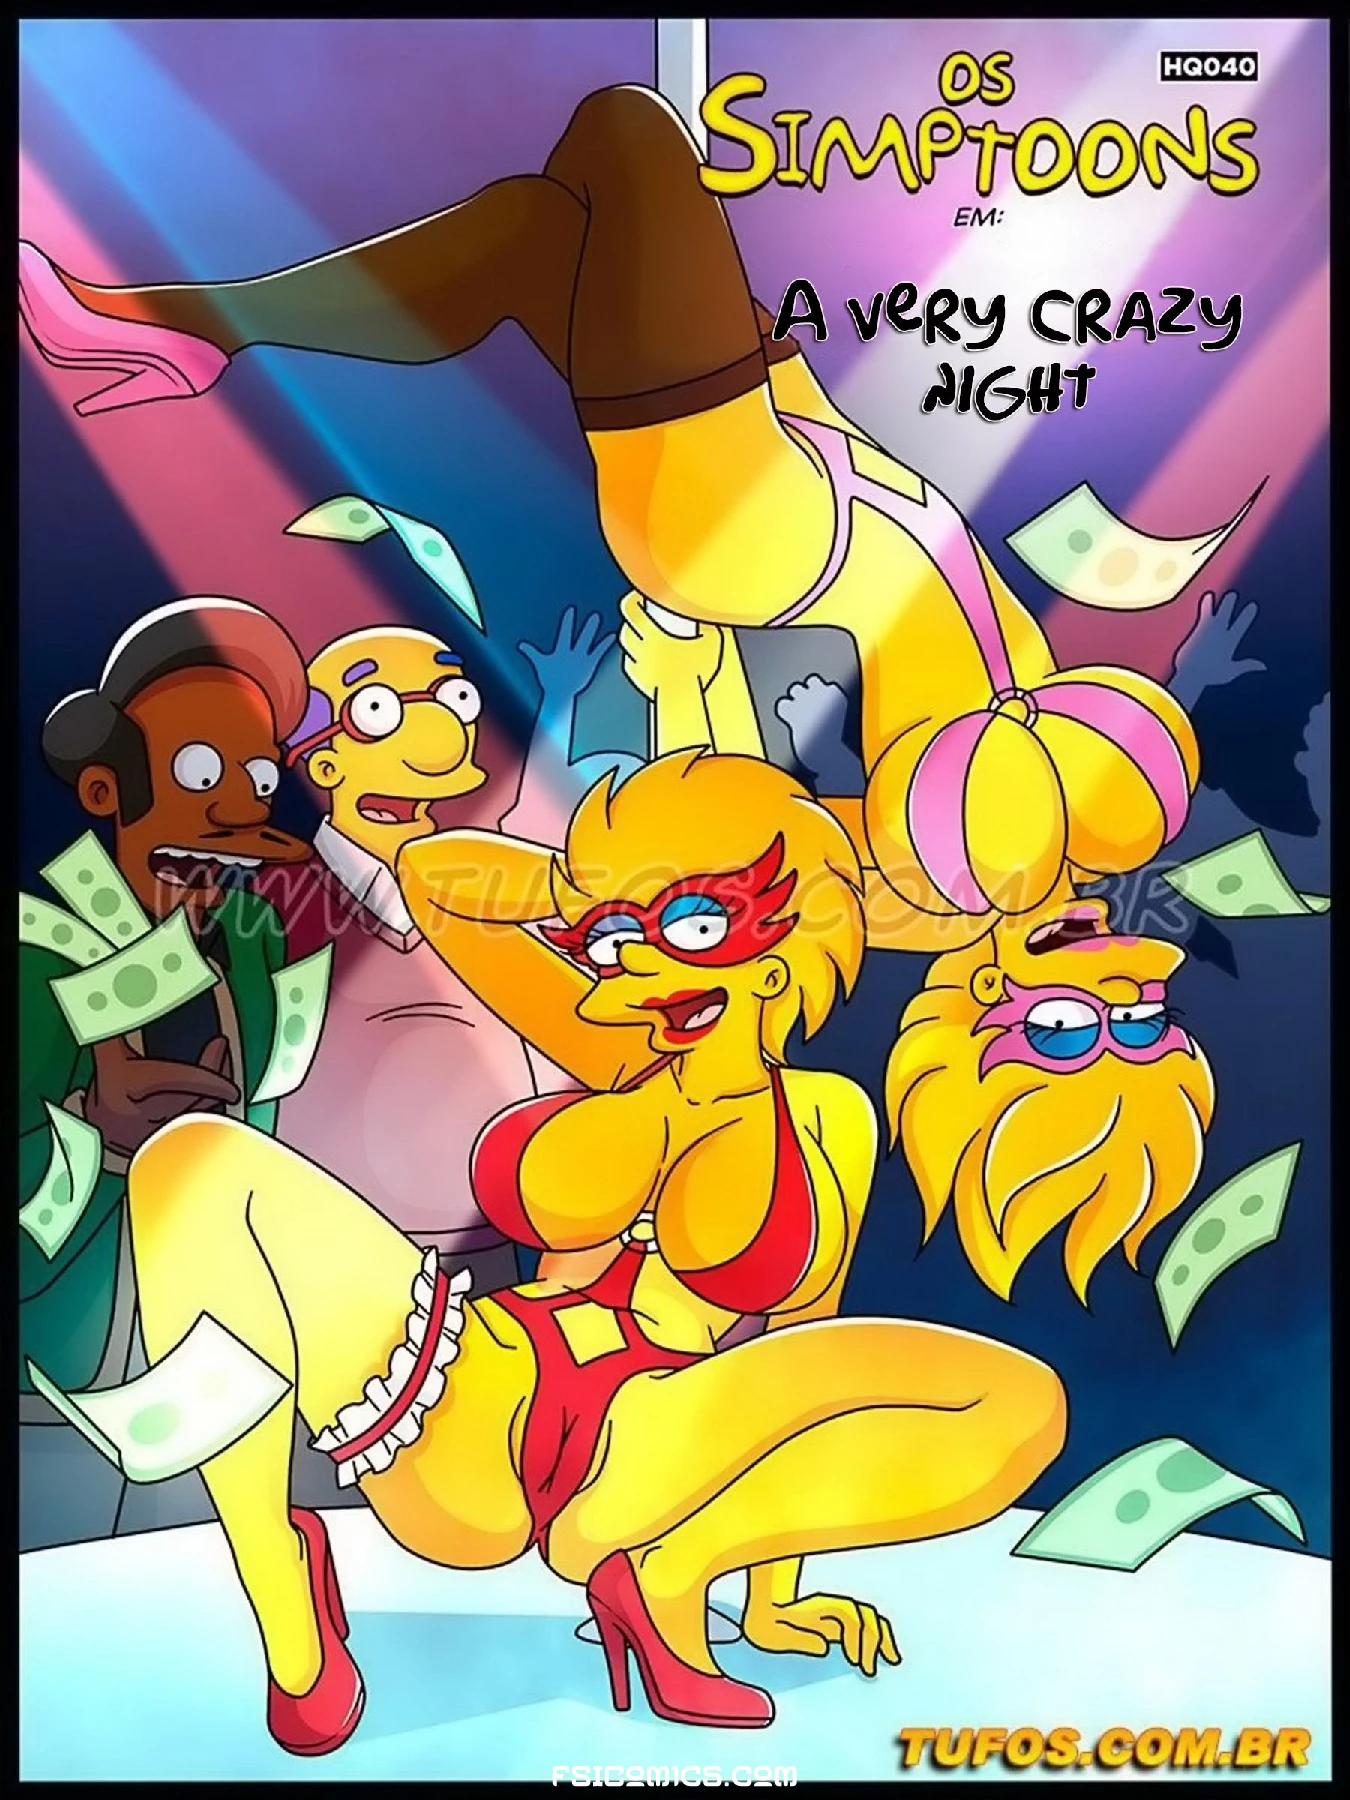 The Simpsons Chapter 40 – A Very Crazy Night – WC TF - 11 - FSIComics